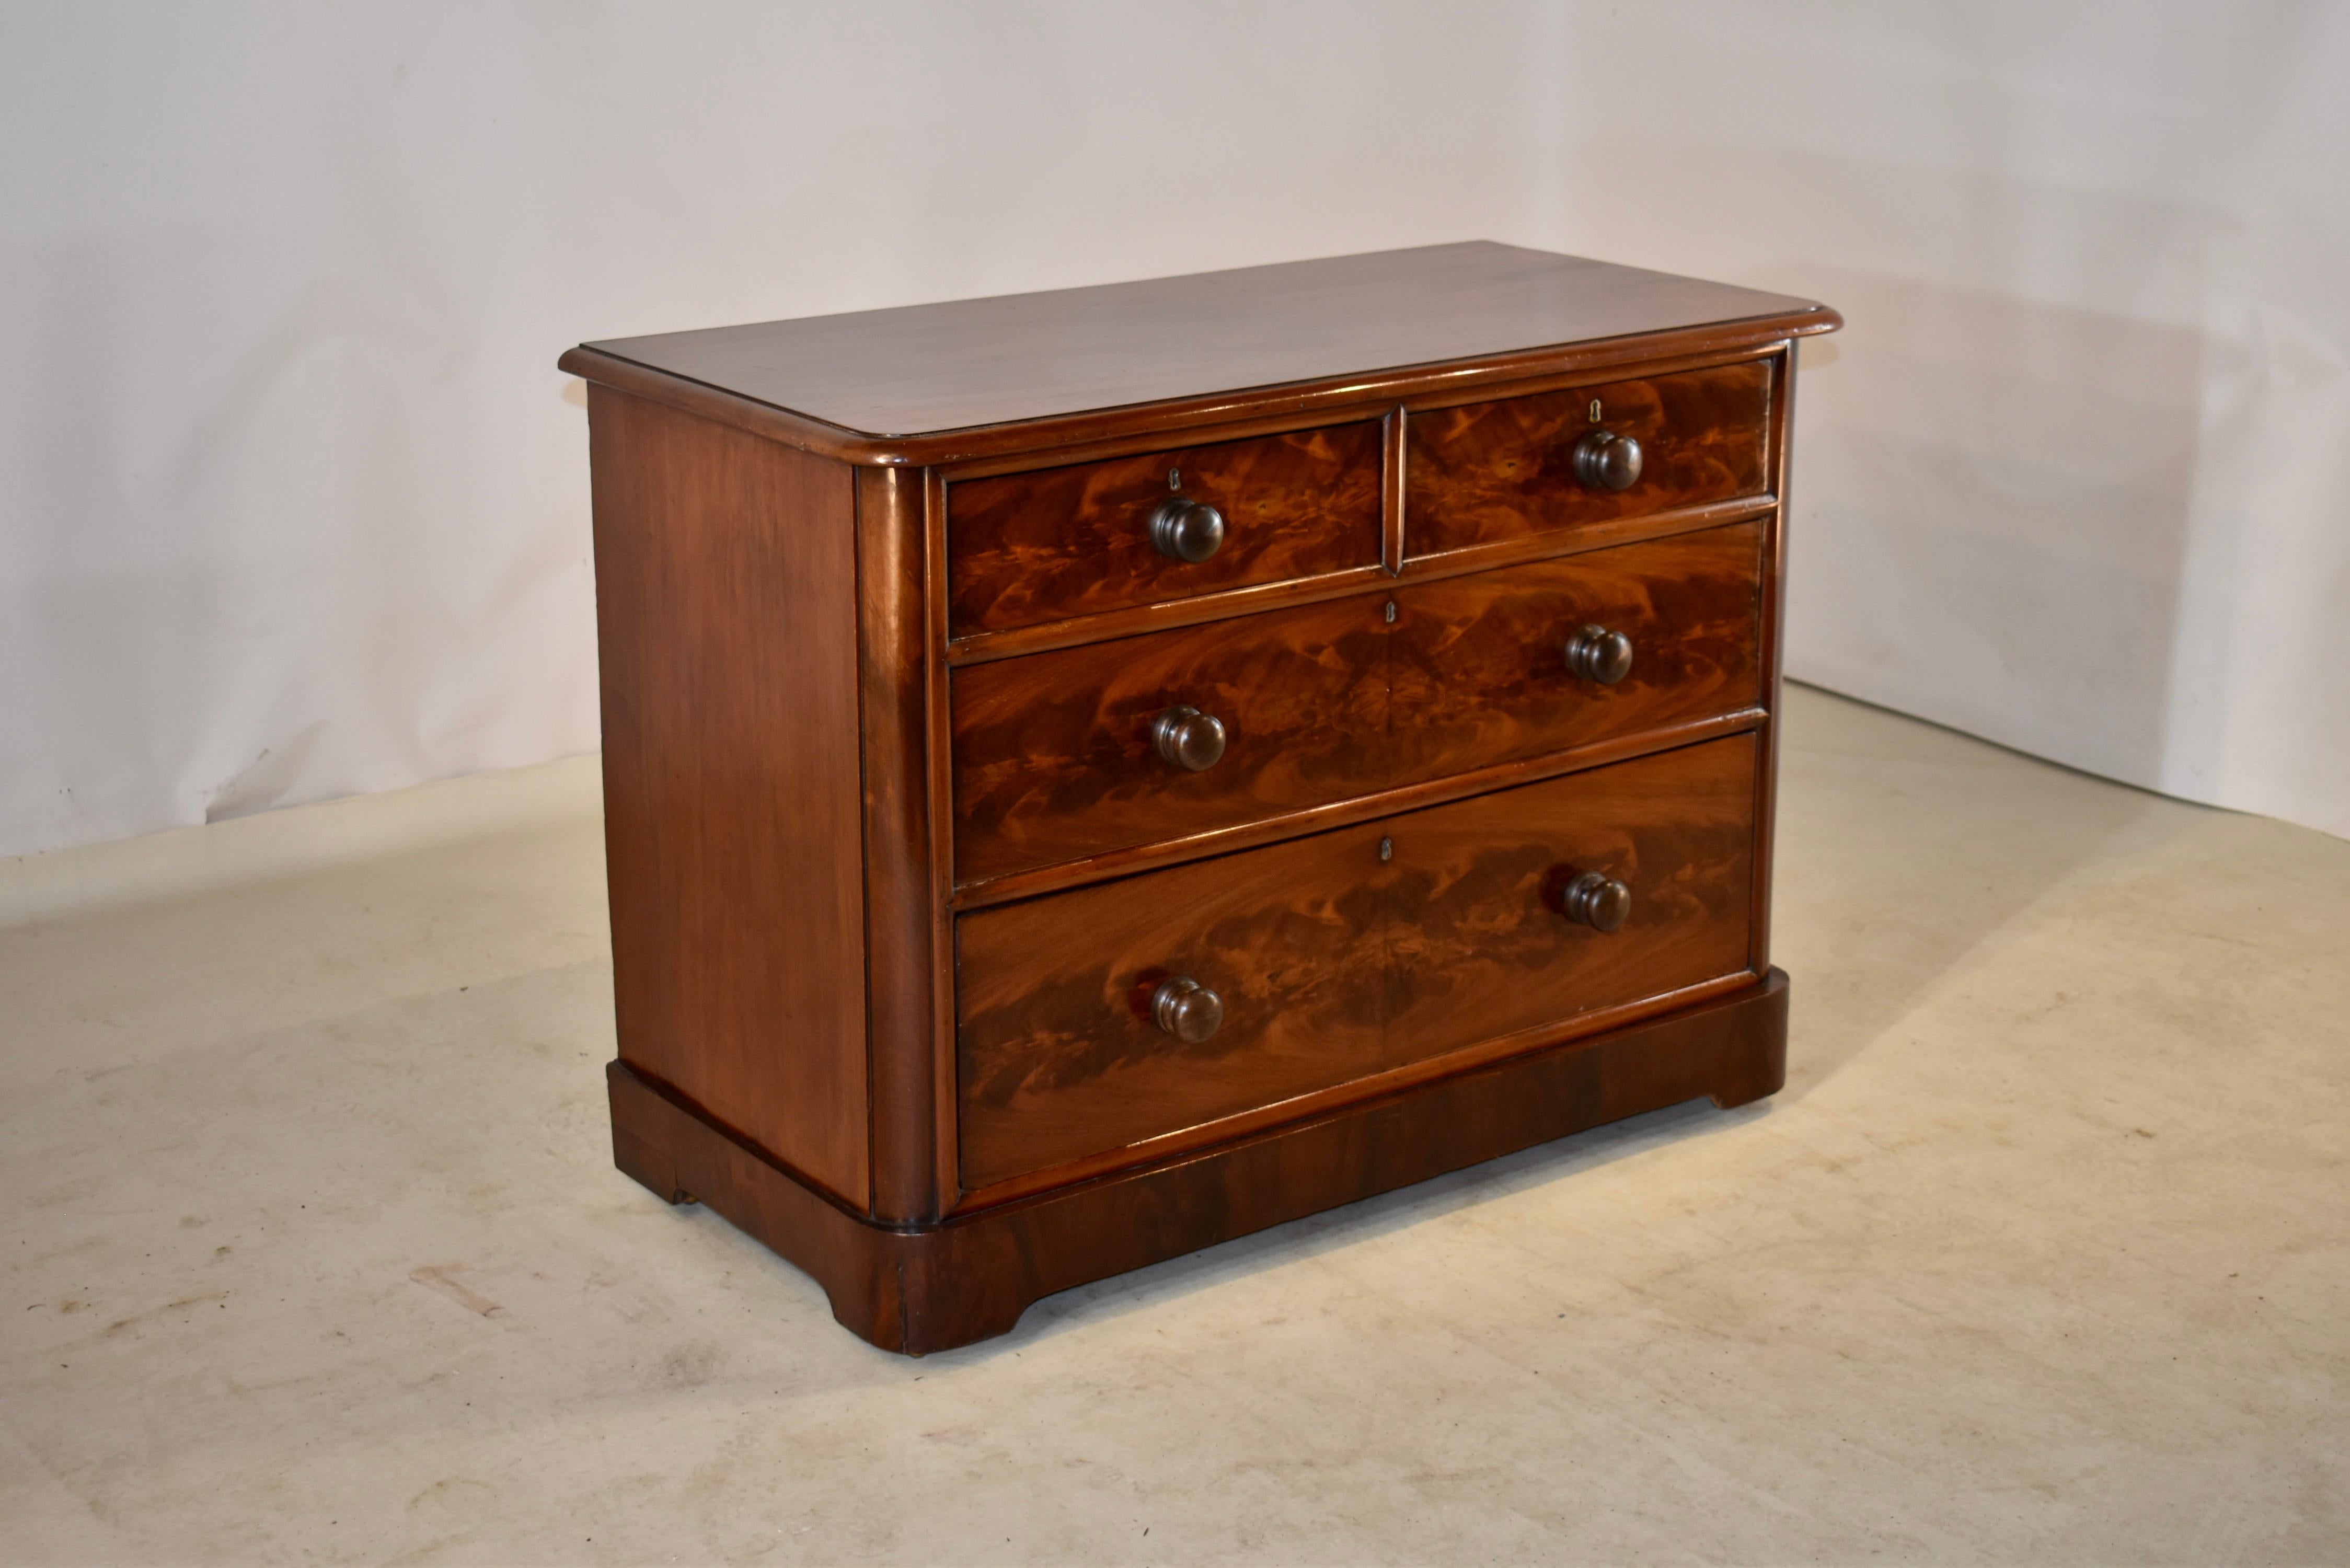 19th century mahogany chest of drawers from England with a single board top with lovely color and graining. This is surrounded by a beveled edge. The sides are simple, and the front contains two drawers over two drawers, all with wonderfully figured